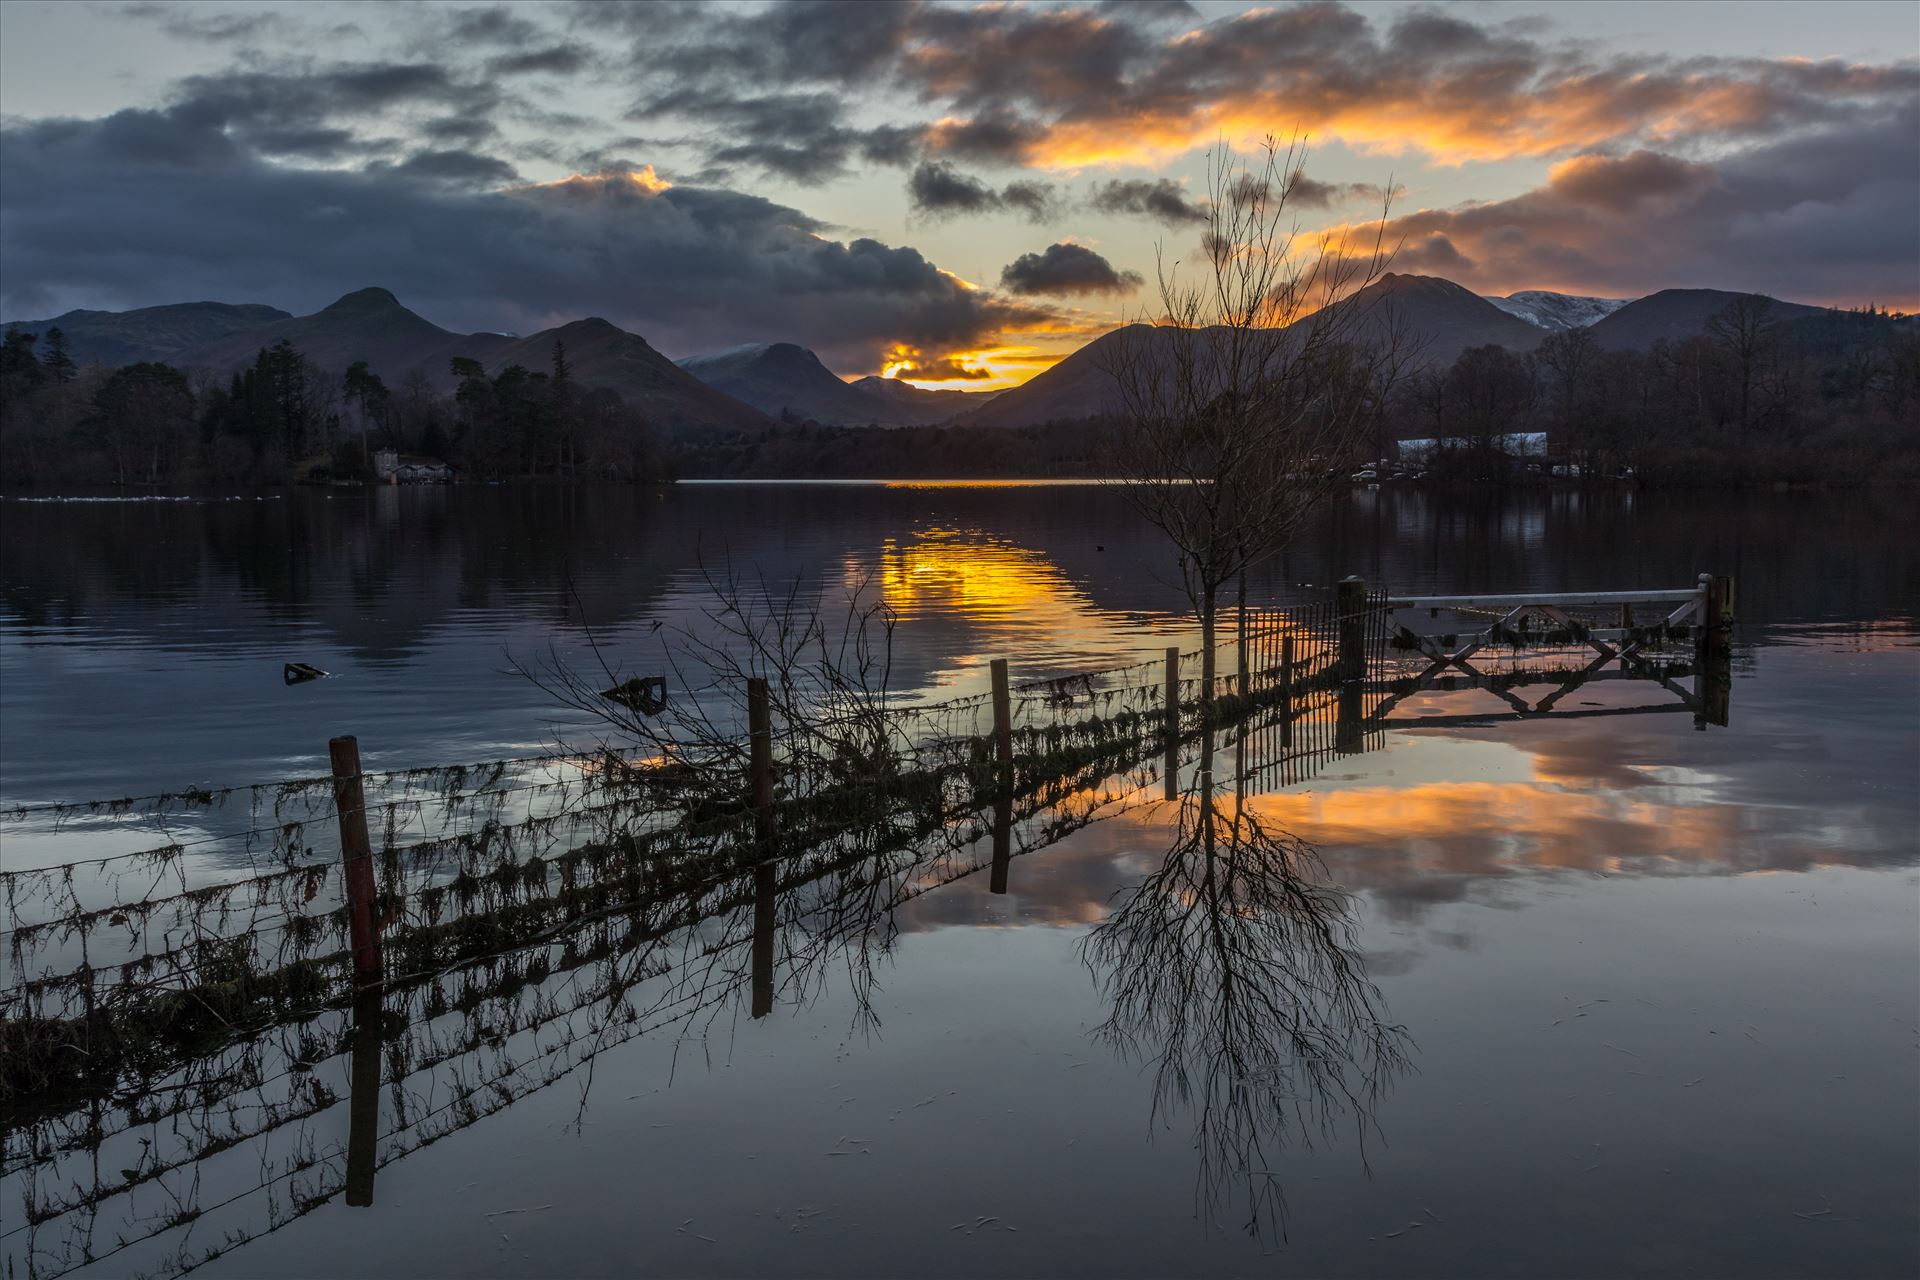 Derwent Water at Sunset Moody looking Derwent Water at sunset in the Lake District. Shot taken from Crow Park just outside Keswick with Catbells in the background. by Tony Keogh Photography